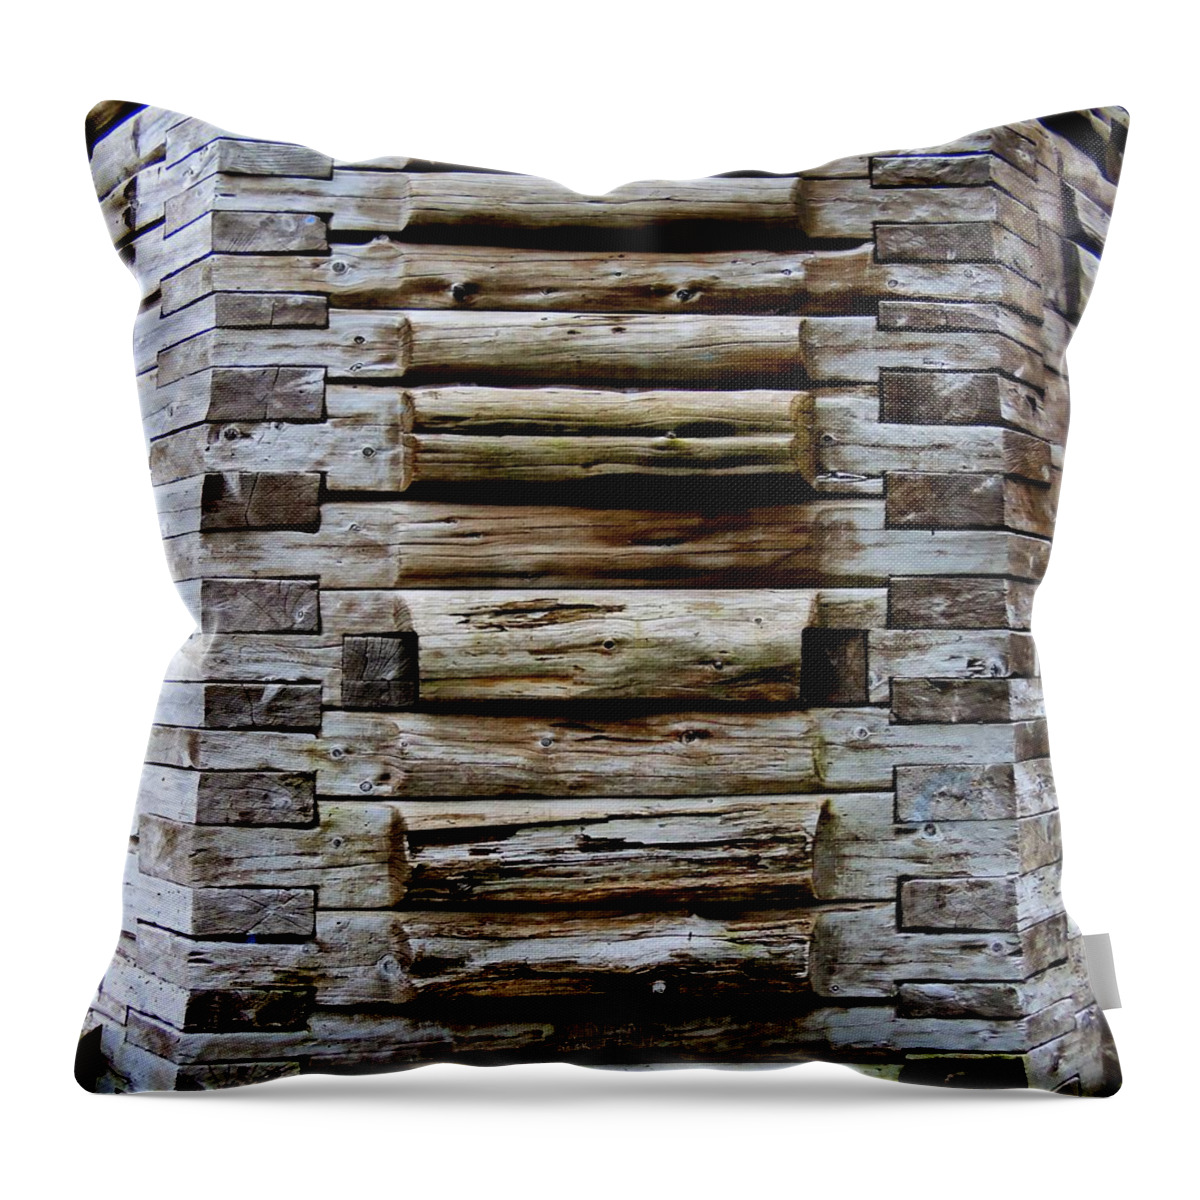 Wood Throw Pillow featuring the photograph The Art Of Wood 2 by Randall Weidner